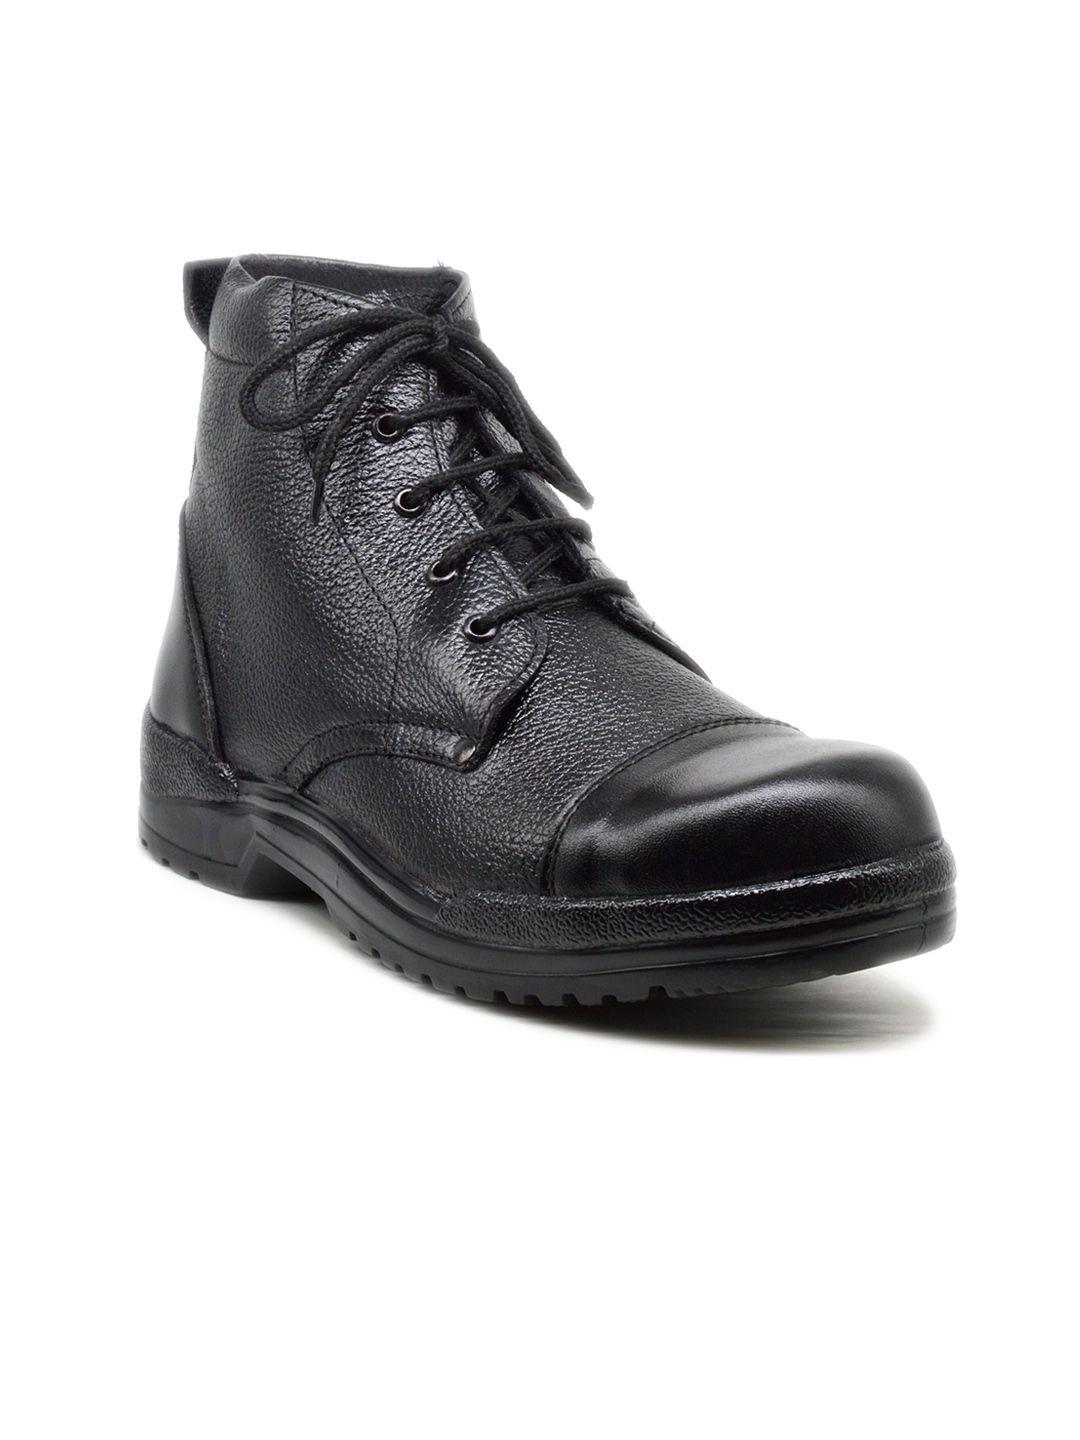 imcolus men textured leather lace-up boots